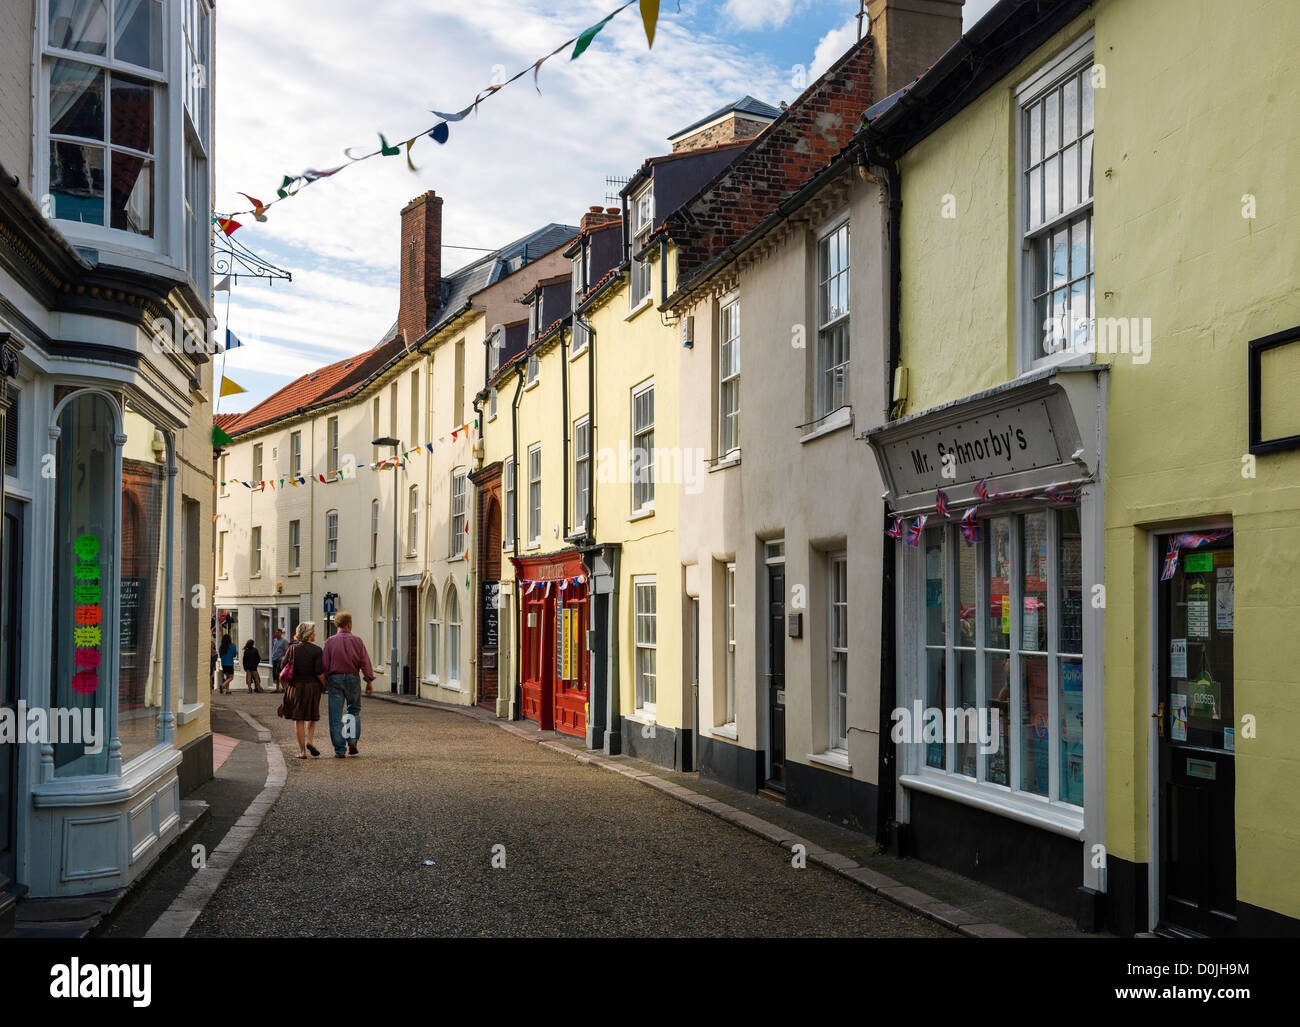 A couple stroll down one of the shopping streets in Cromer. Stock Photo